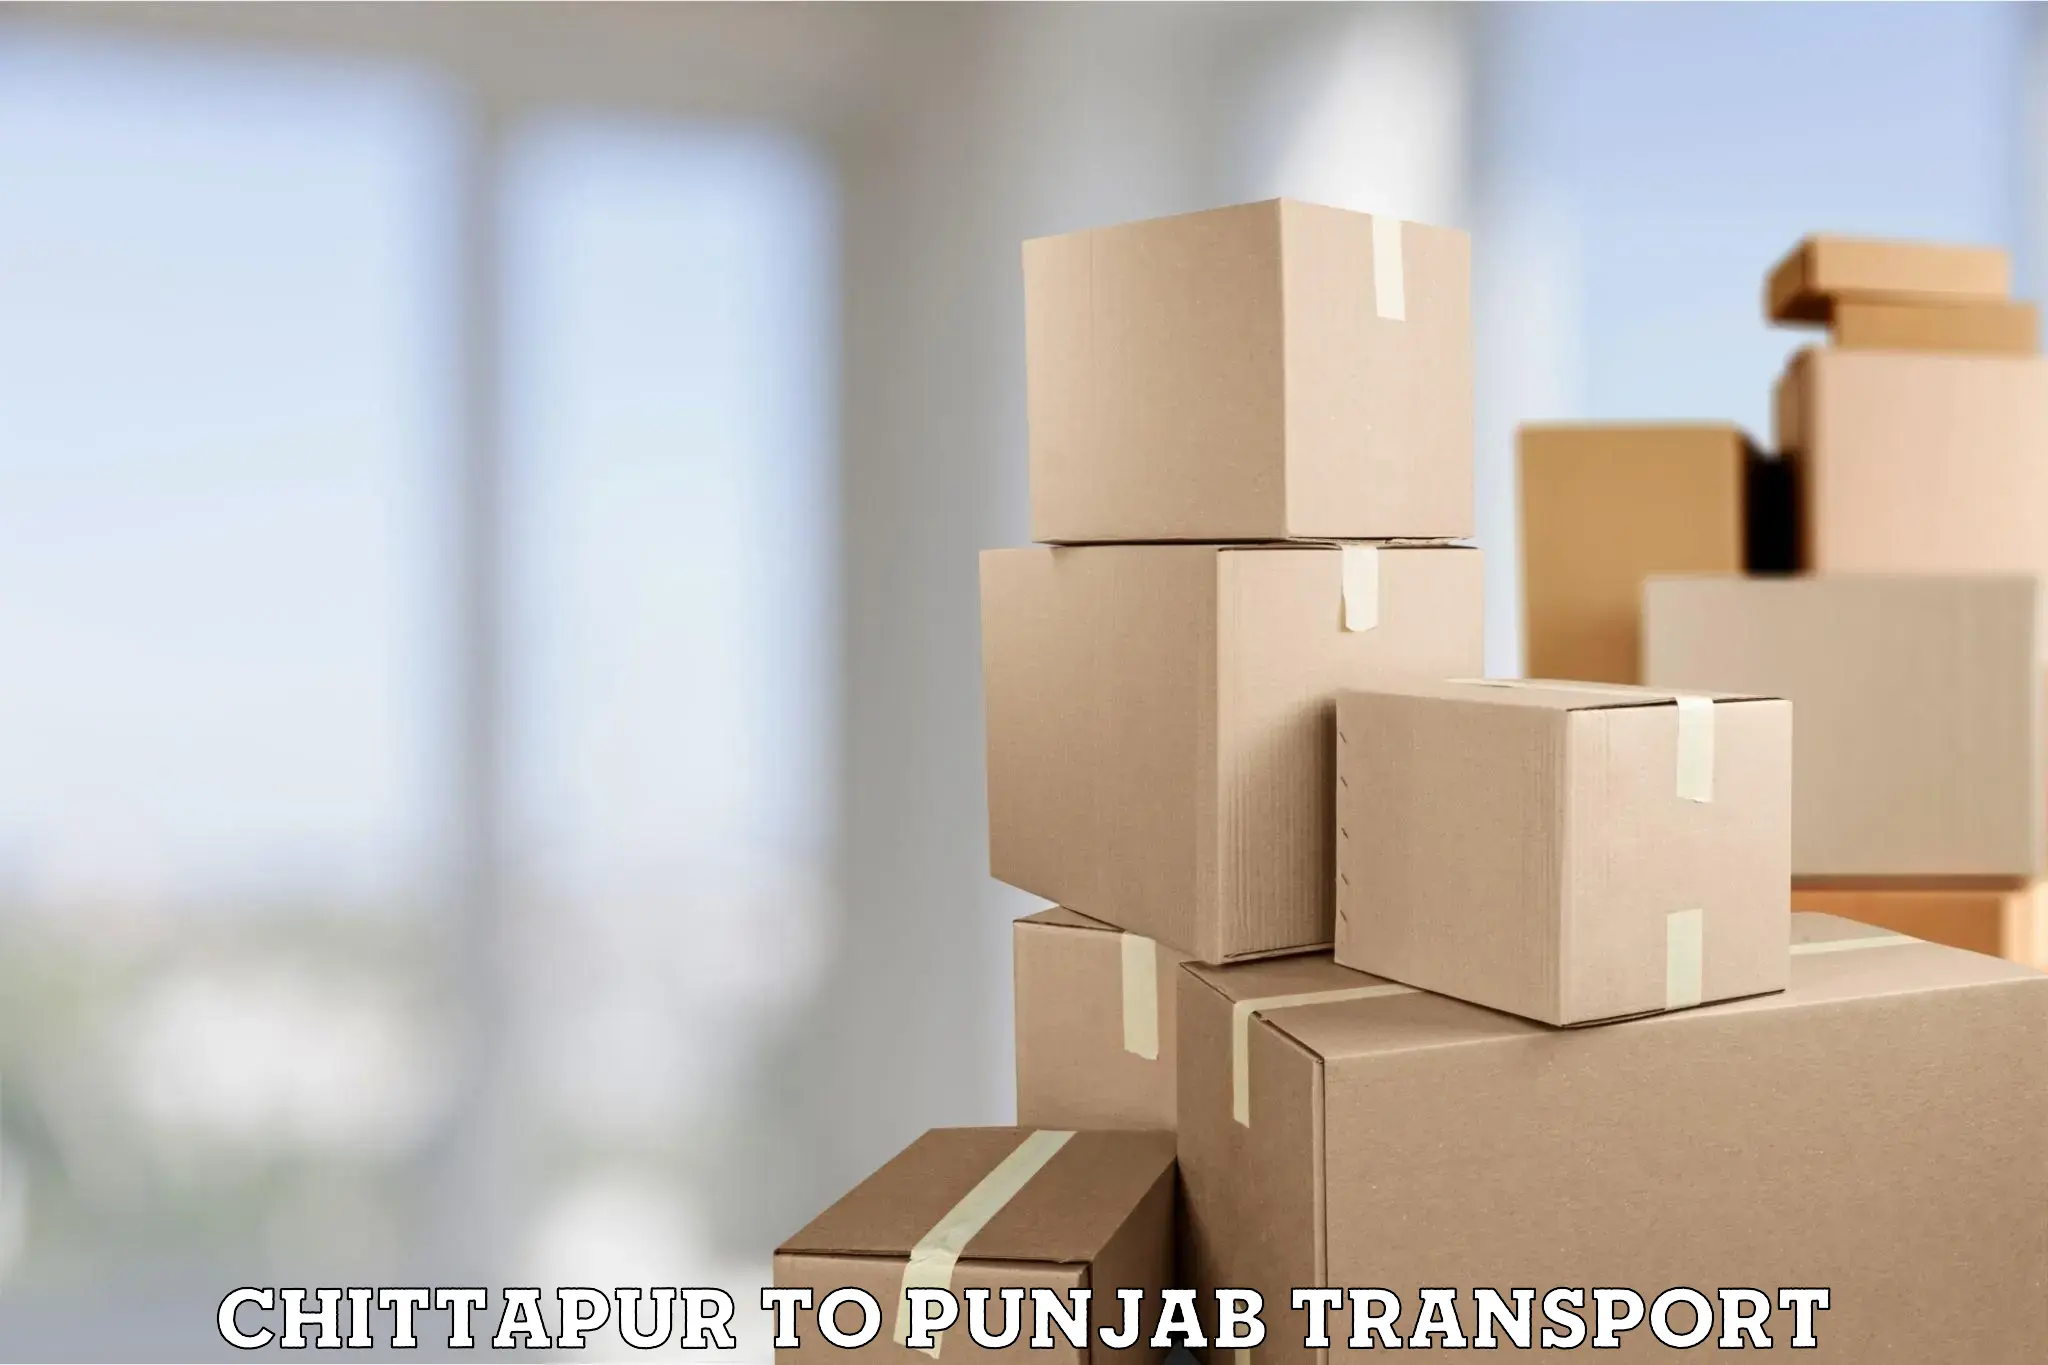 Container transportation services in Chittapur to Jalandhar